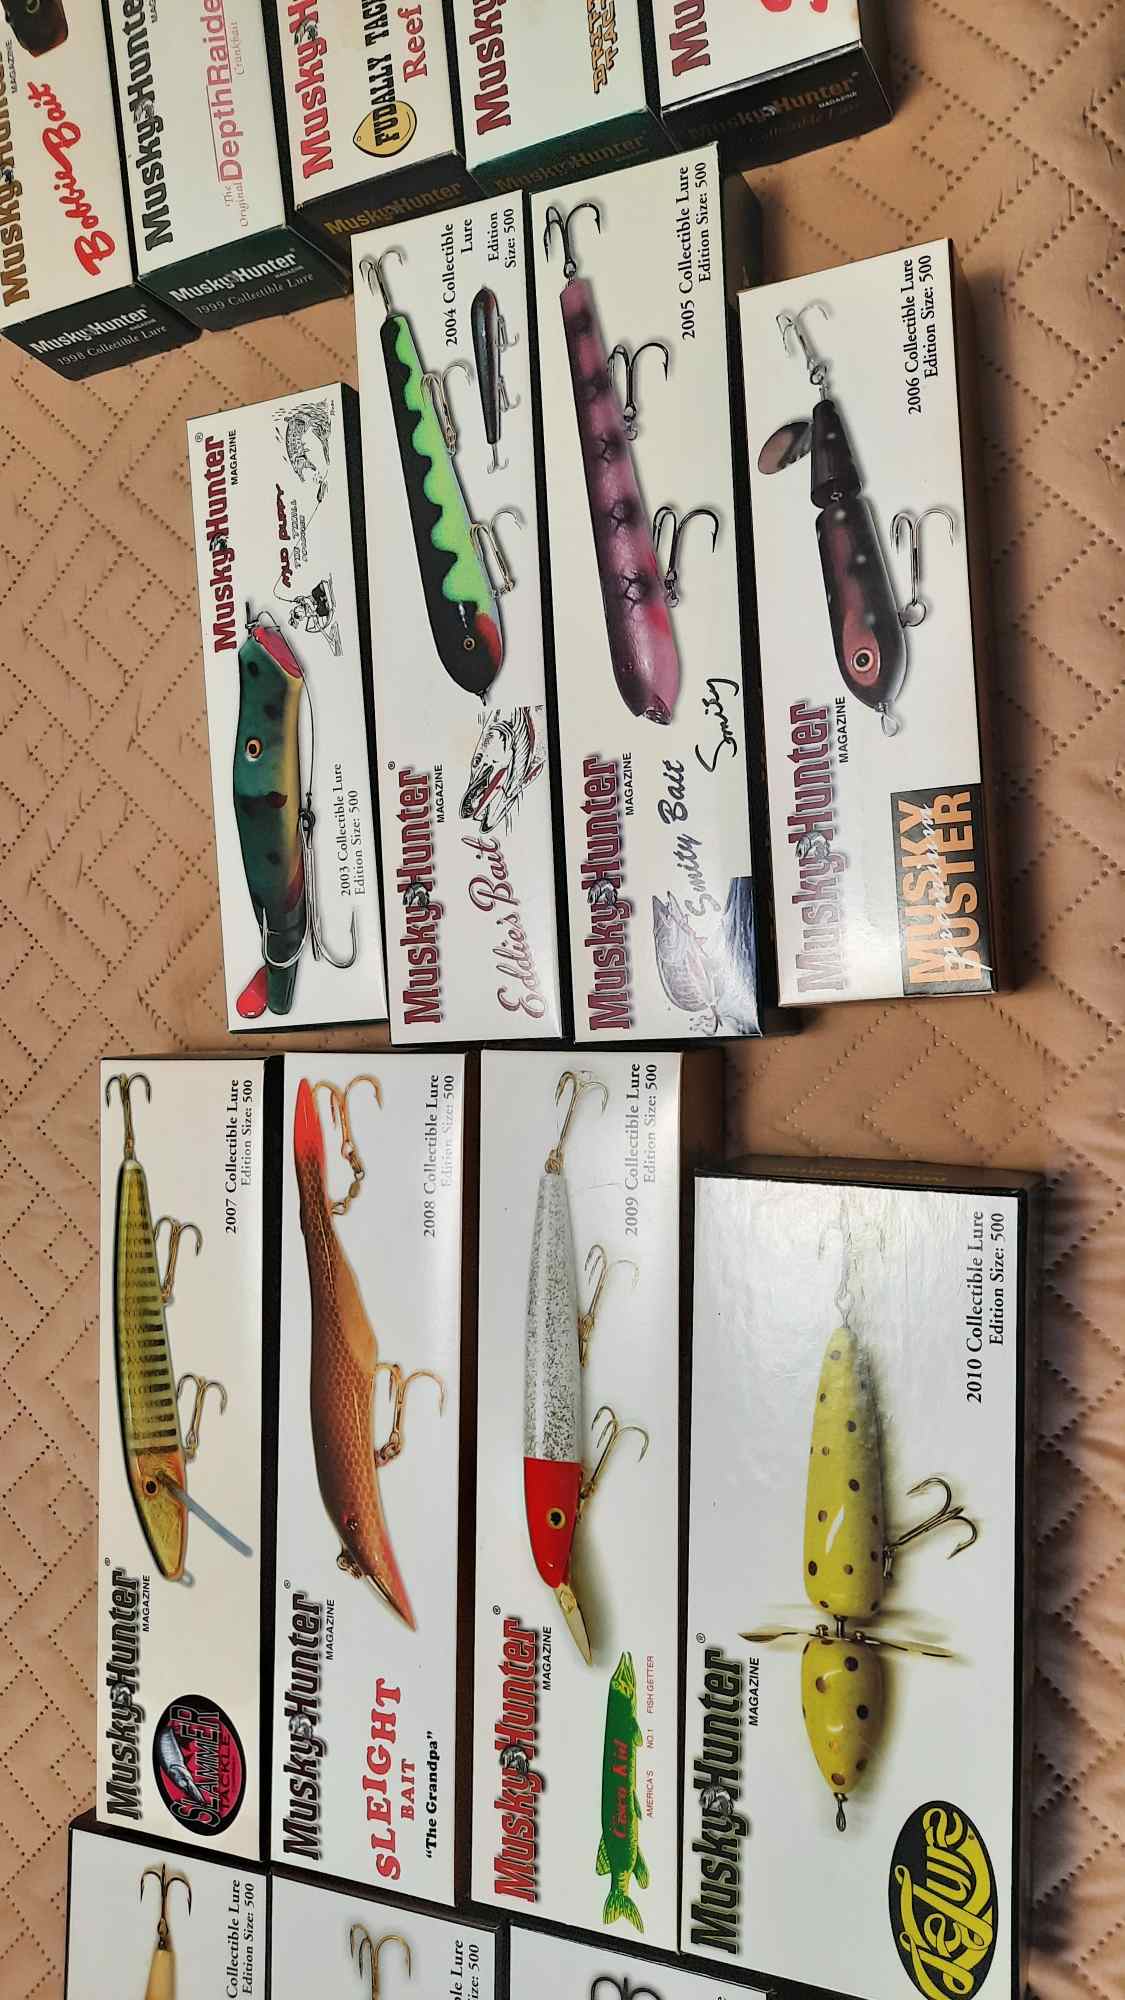 https://muskie.outdoorsfirst.com/board/forums/get-attachment.asp?attachmentid=153605